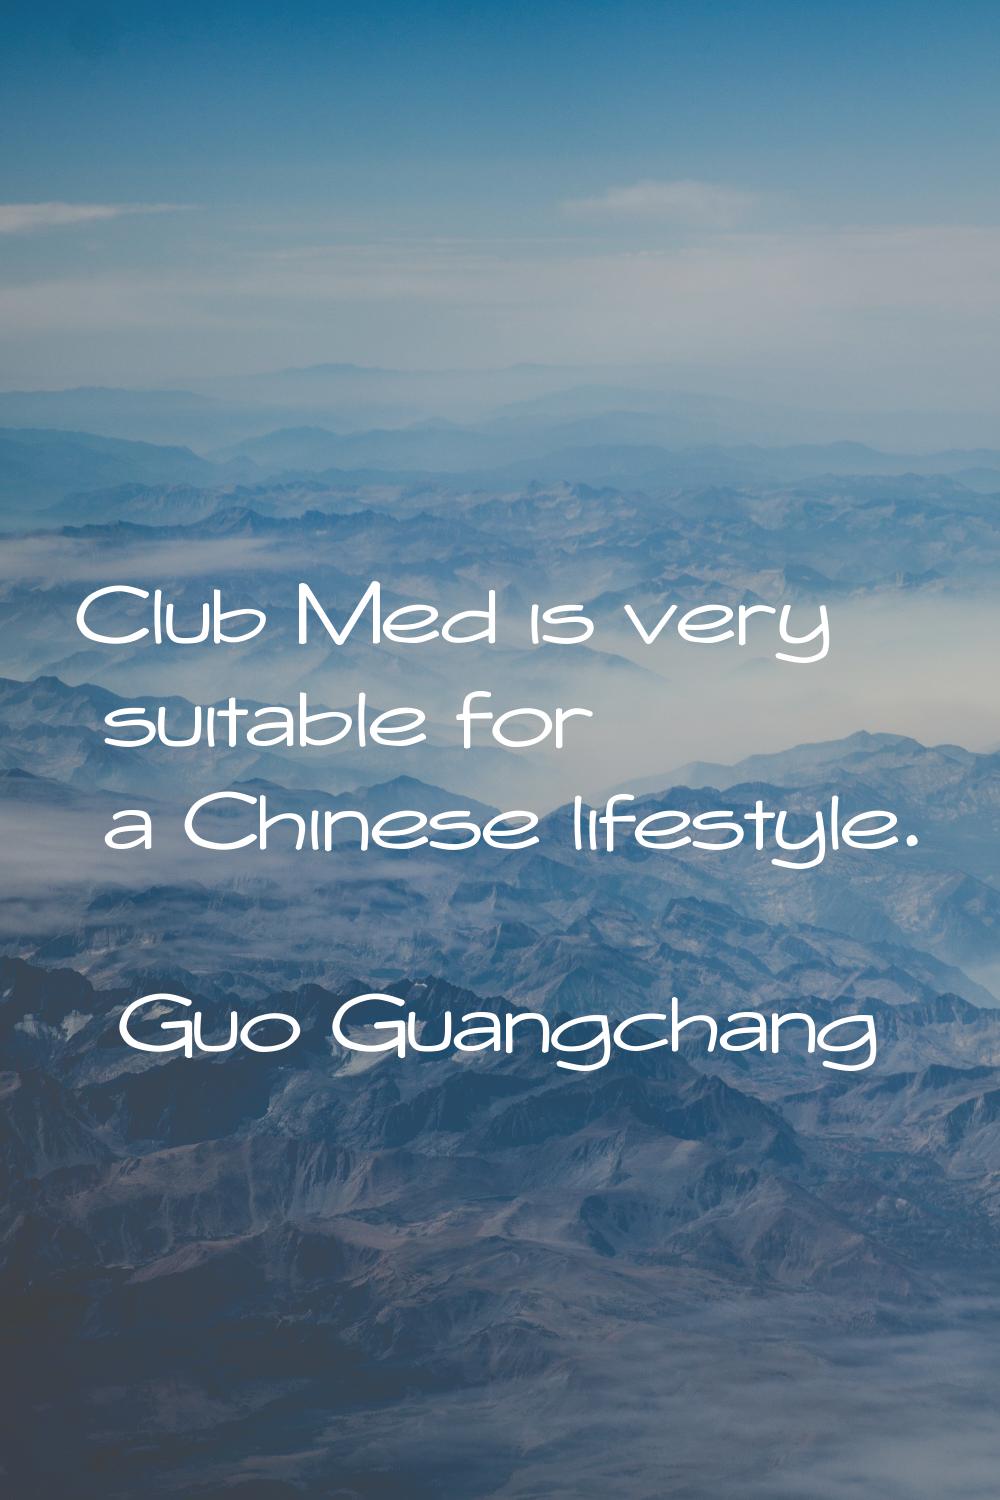 Club Med is very suitable for a Chinese lifestyle.